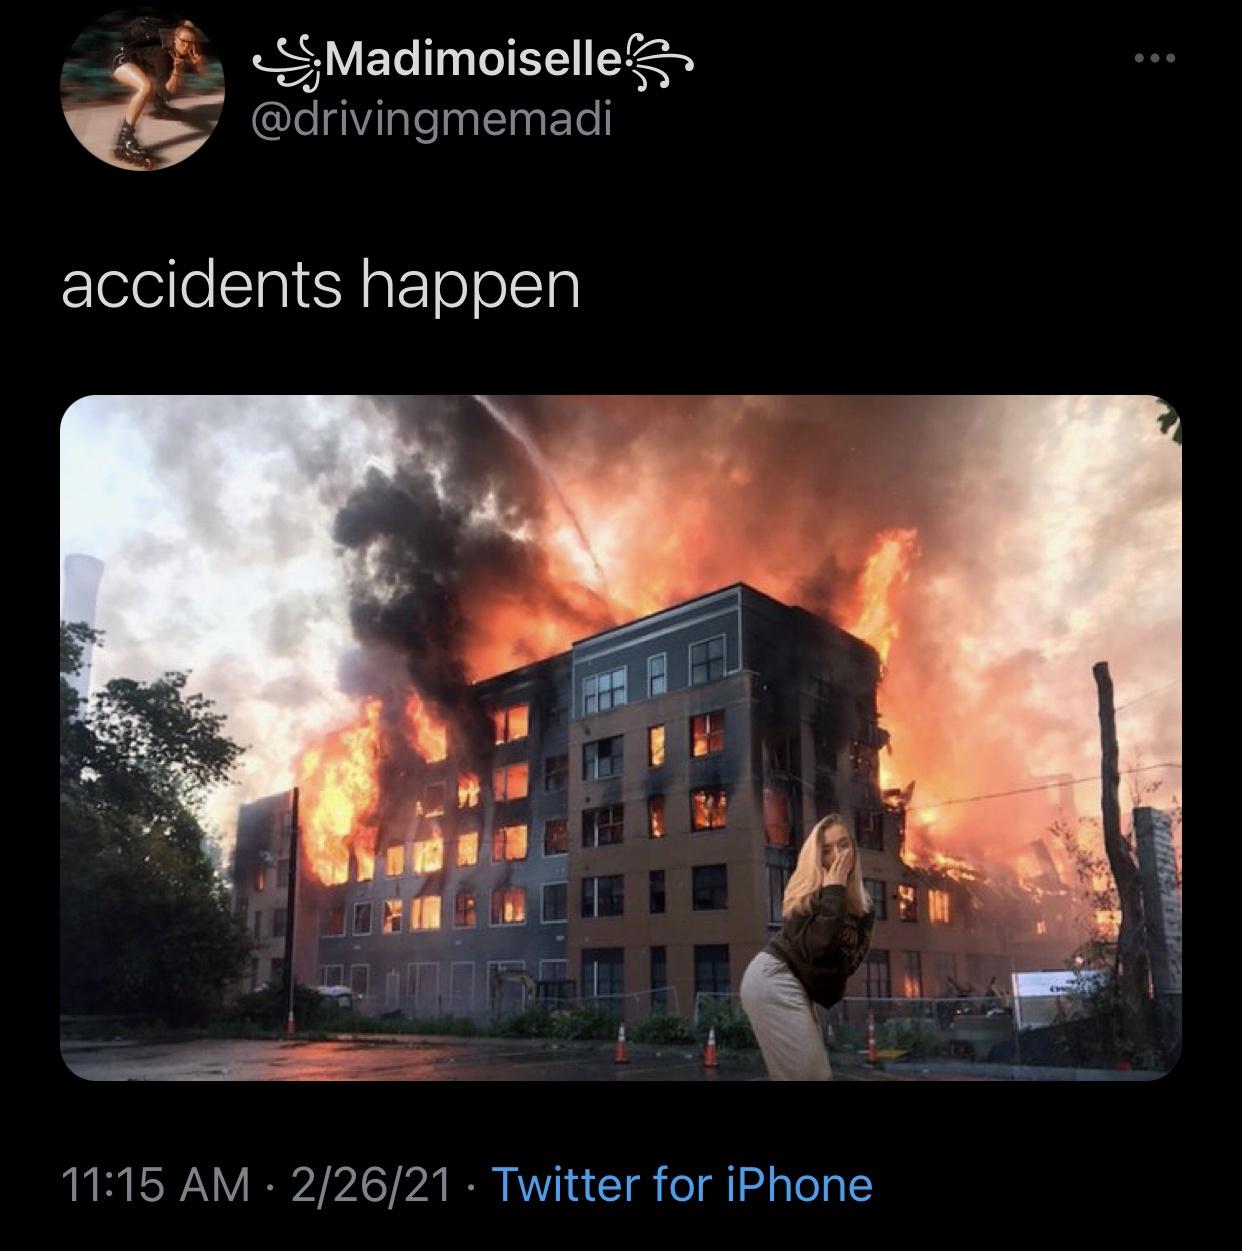 fires in buildings - S; Madimoiselle's accidents happen 22621 Twitter for iPhone